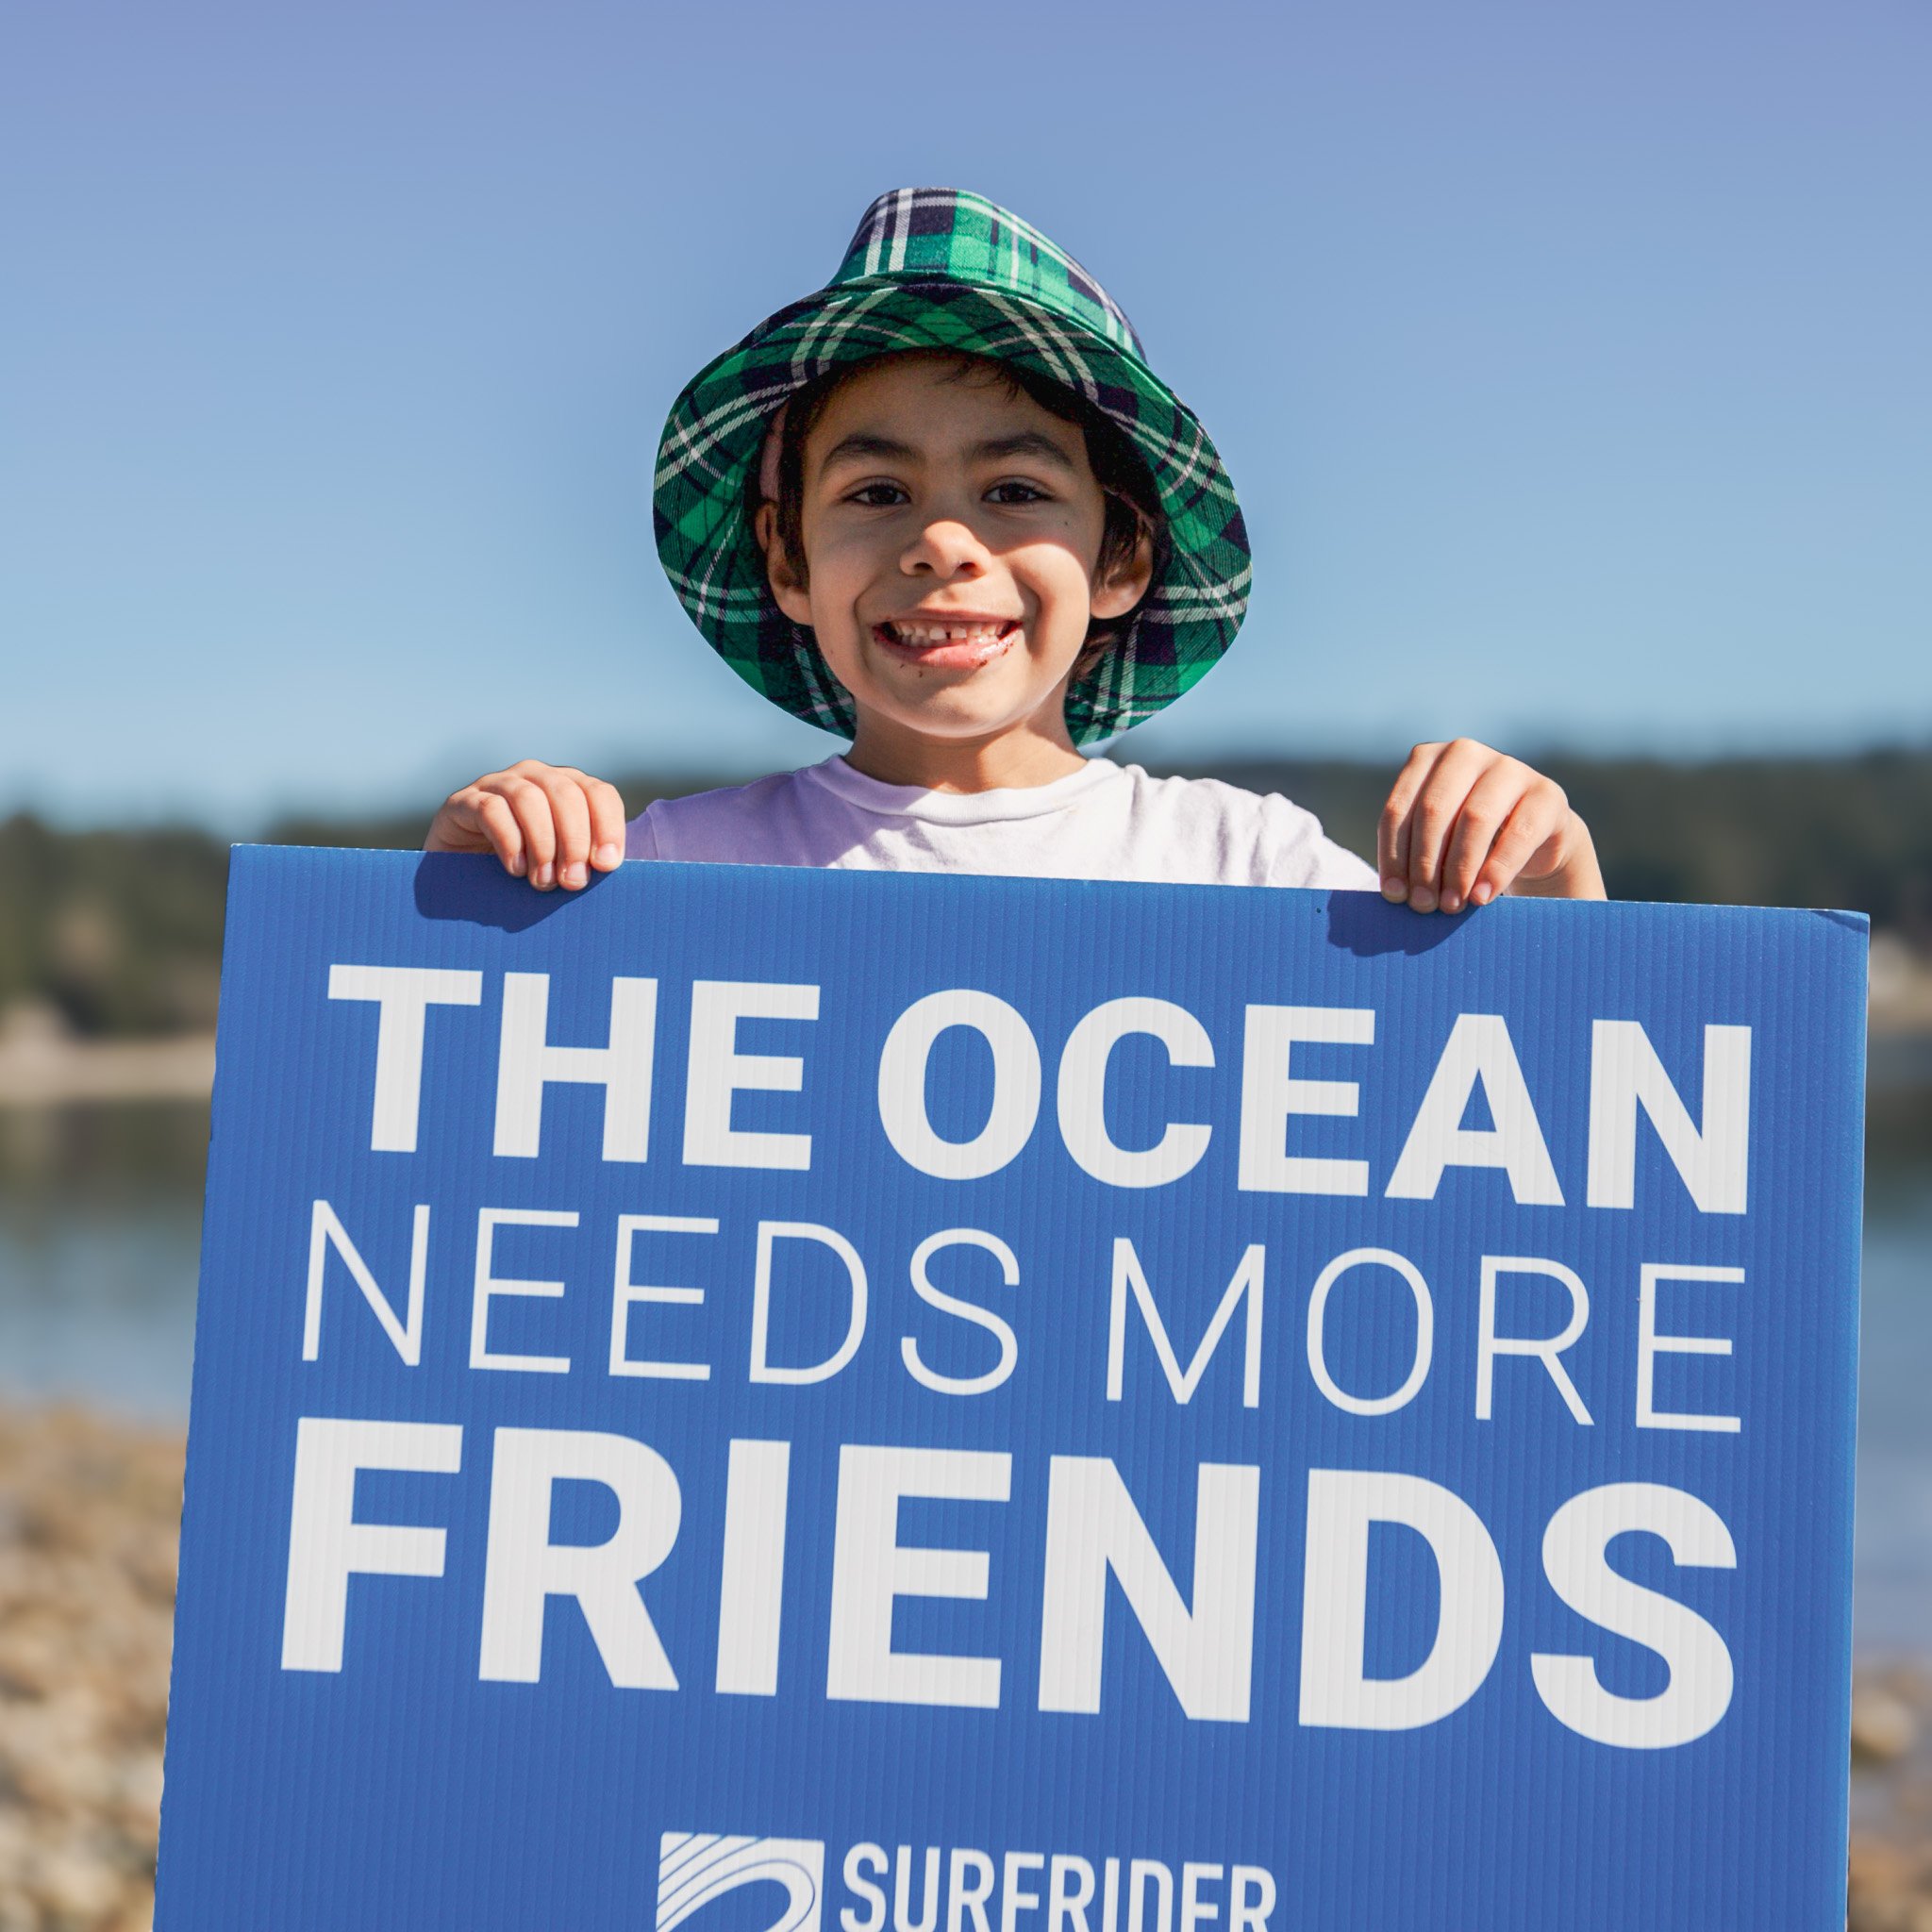 A young boy wearing a plaid green hat, smiling big, and holding a sign that says The Ocean Needs More Friends